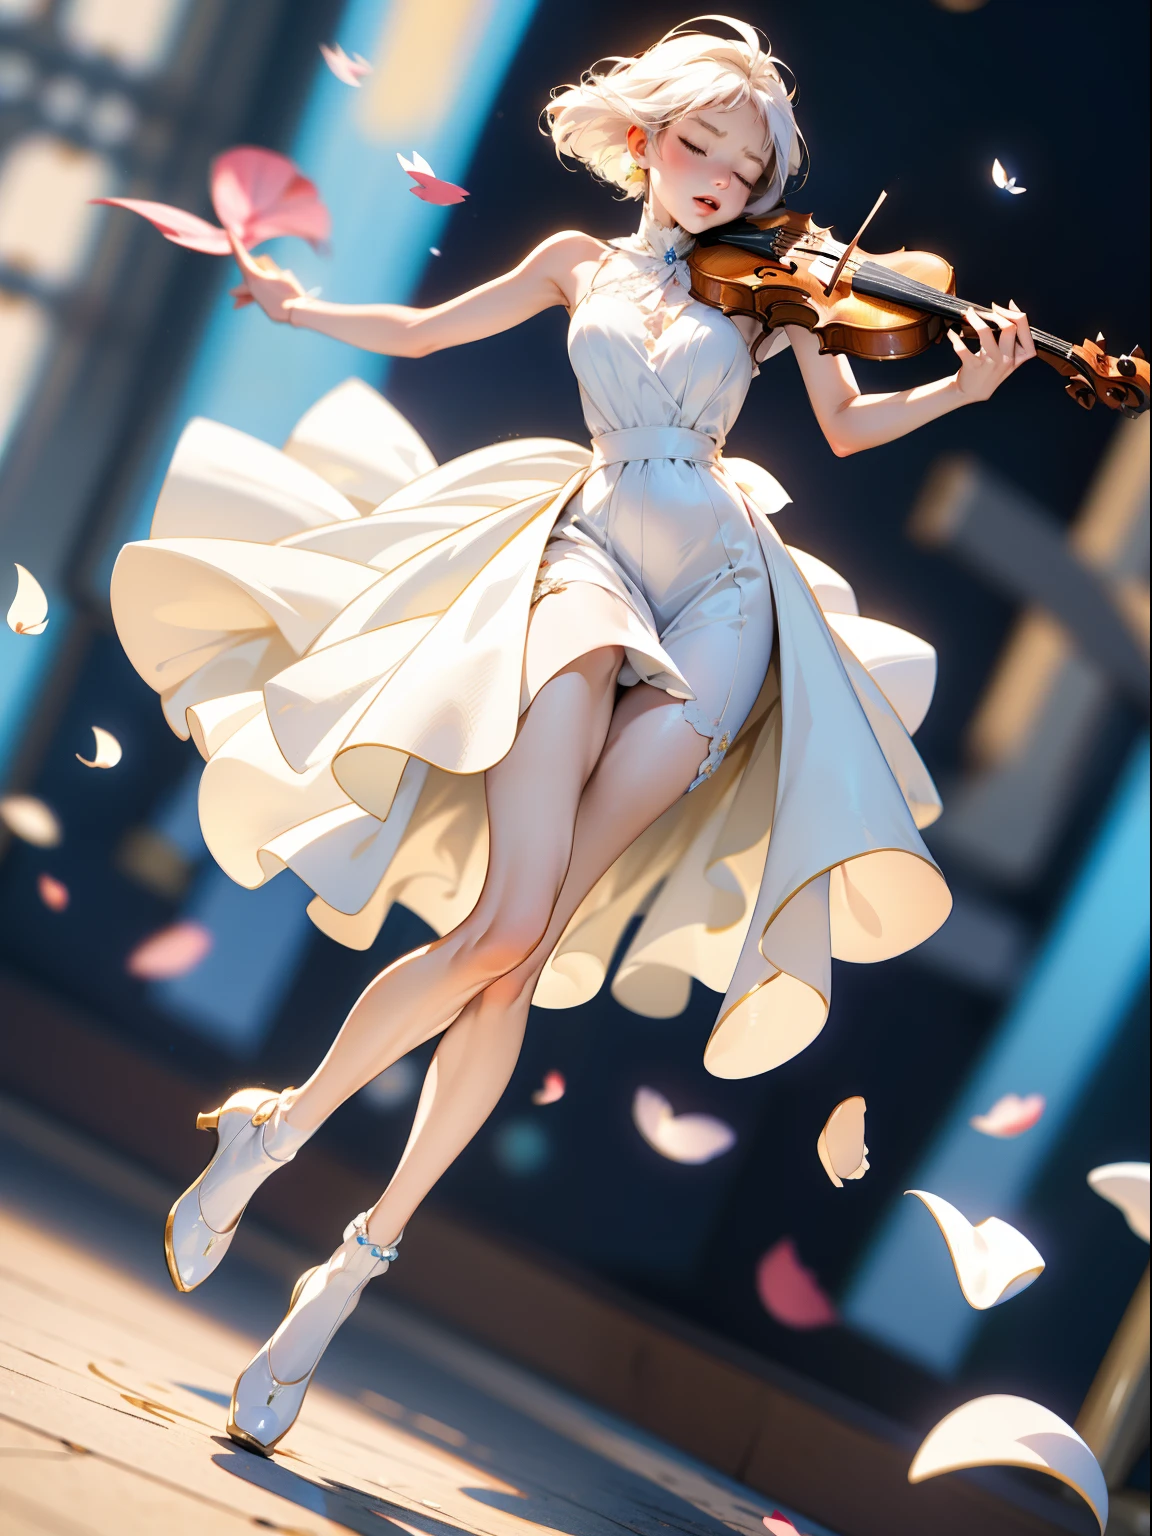 (A girl in a dress is in the air:1.3), playing a violin, Eiffel Tower background(wide shot, wide-angle lens,Panoramic:1.2),super vista, super wide AngleLow Angle shooting, super wide lens, blurry, blurry_background, blurry_foreground, depth_of_field, motion_blur, violinbare shoulderspetalsWhite and blue dressfrom belowblurry foreground (Milky skin:1.4),(Closed eyes:1.3), (full body:1.5),(long legs:1.3),